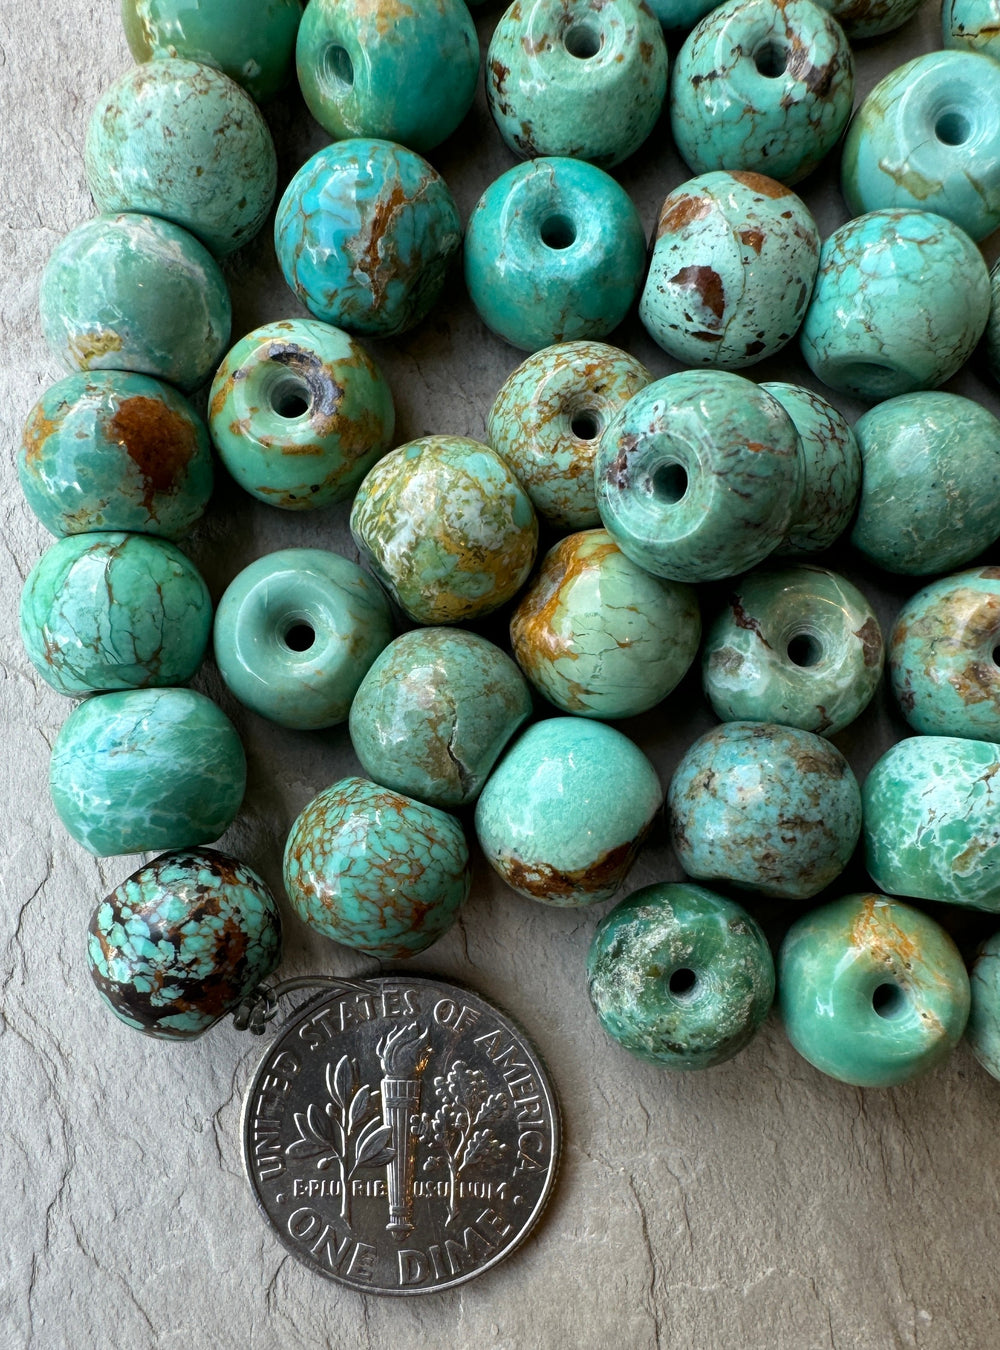 Hubei Turquoise (China) 10x8mm Drum Shaped Beads (Package